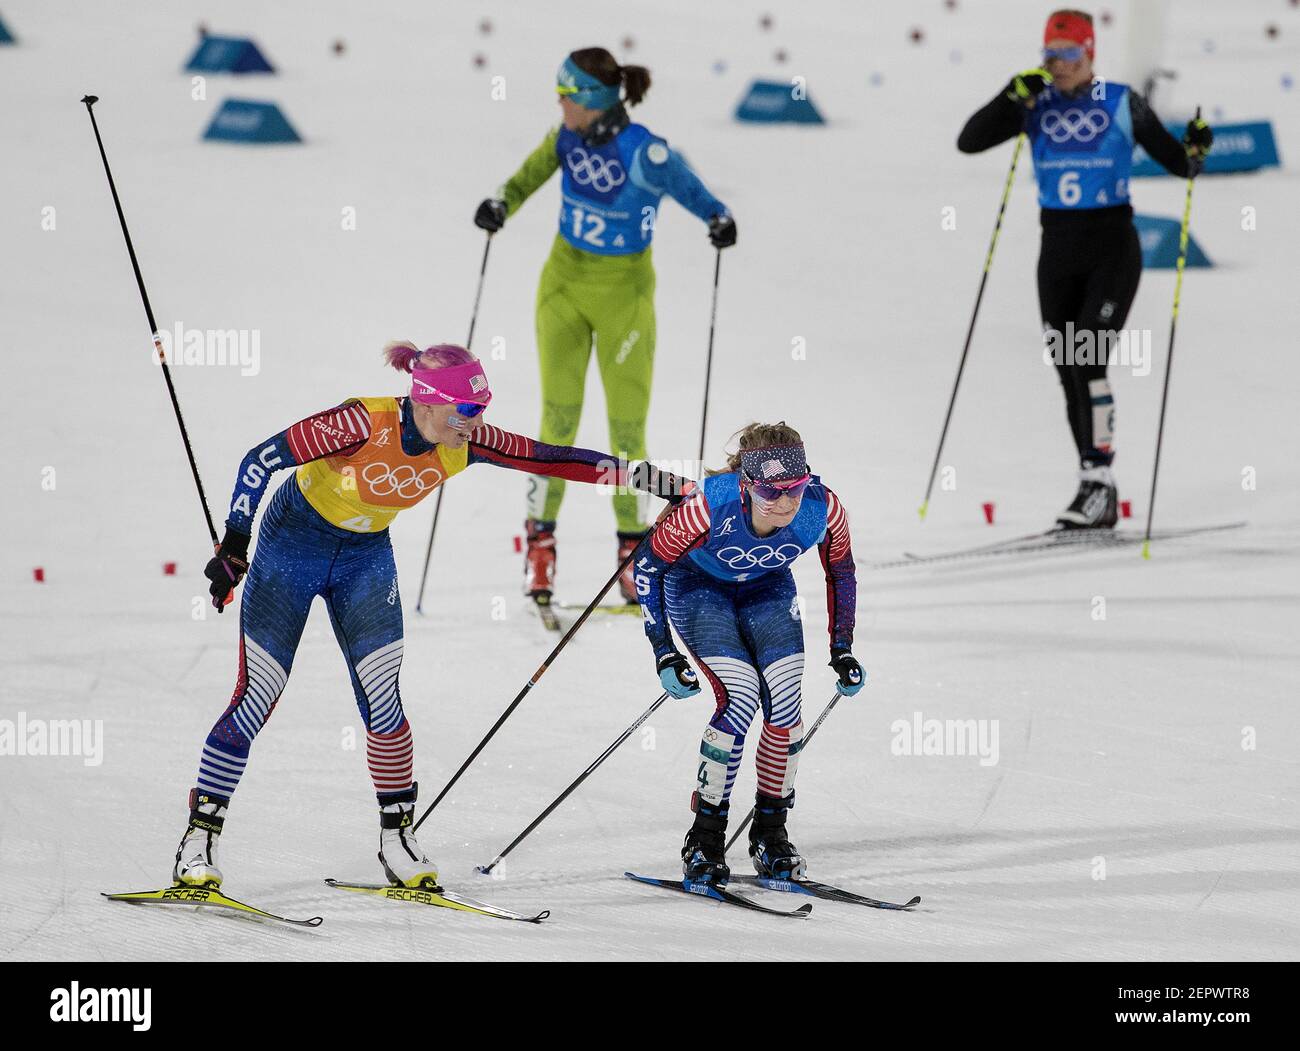 The United States' Kikkan Randall, left, touches teammate Jessie Diggins during an exchange in the Women's 4x5km Relay at Alpensia Cross-Country Centre during the Pyeongchang Winter Olympics on Saturday, Feb. 17, 2018. (Photo by Carlos Gonzalez/Minneapolis Star Tribune/TNS/Sipa USA) Stock Photo